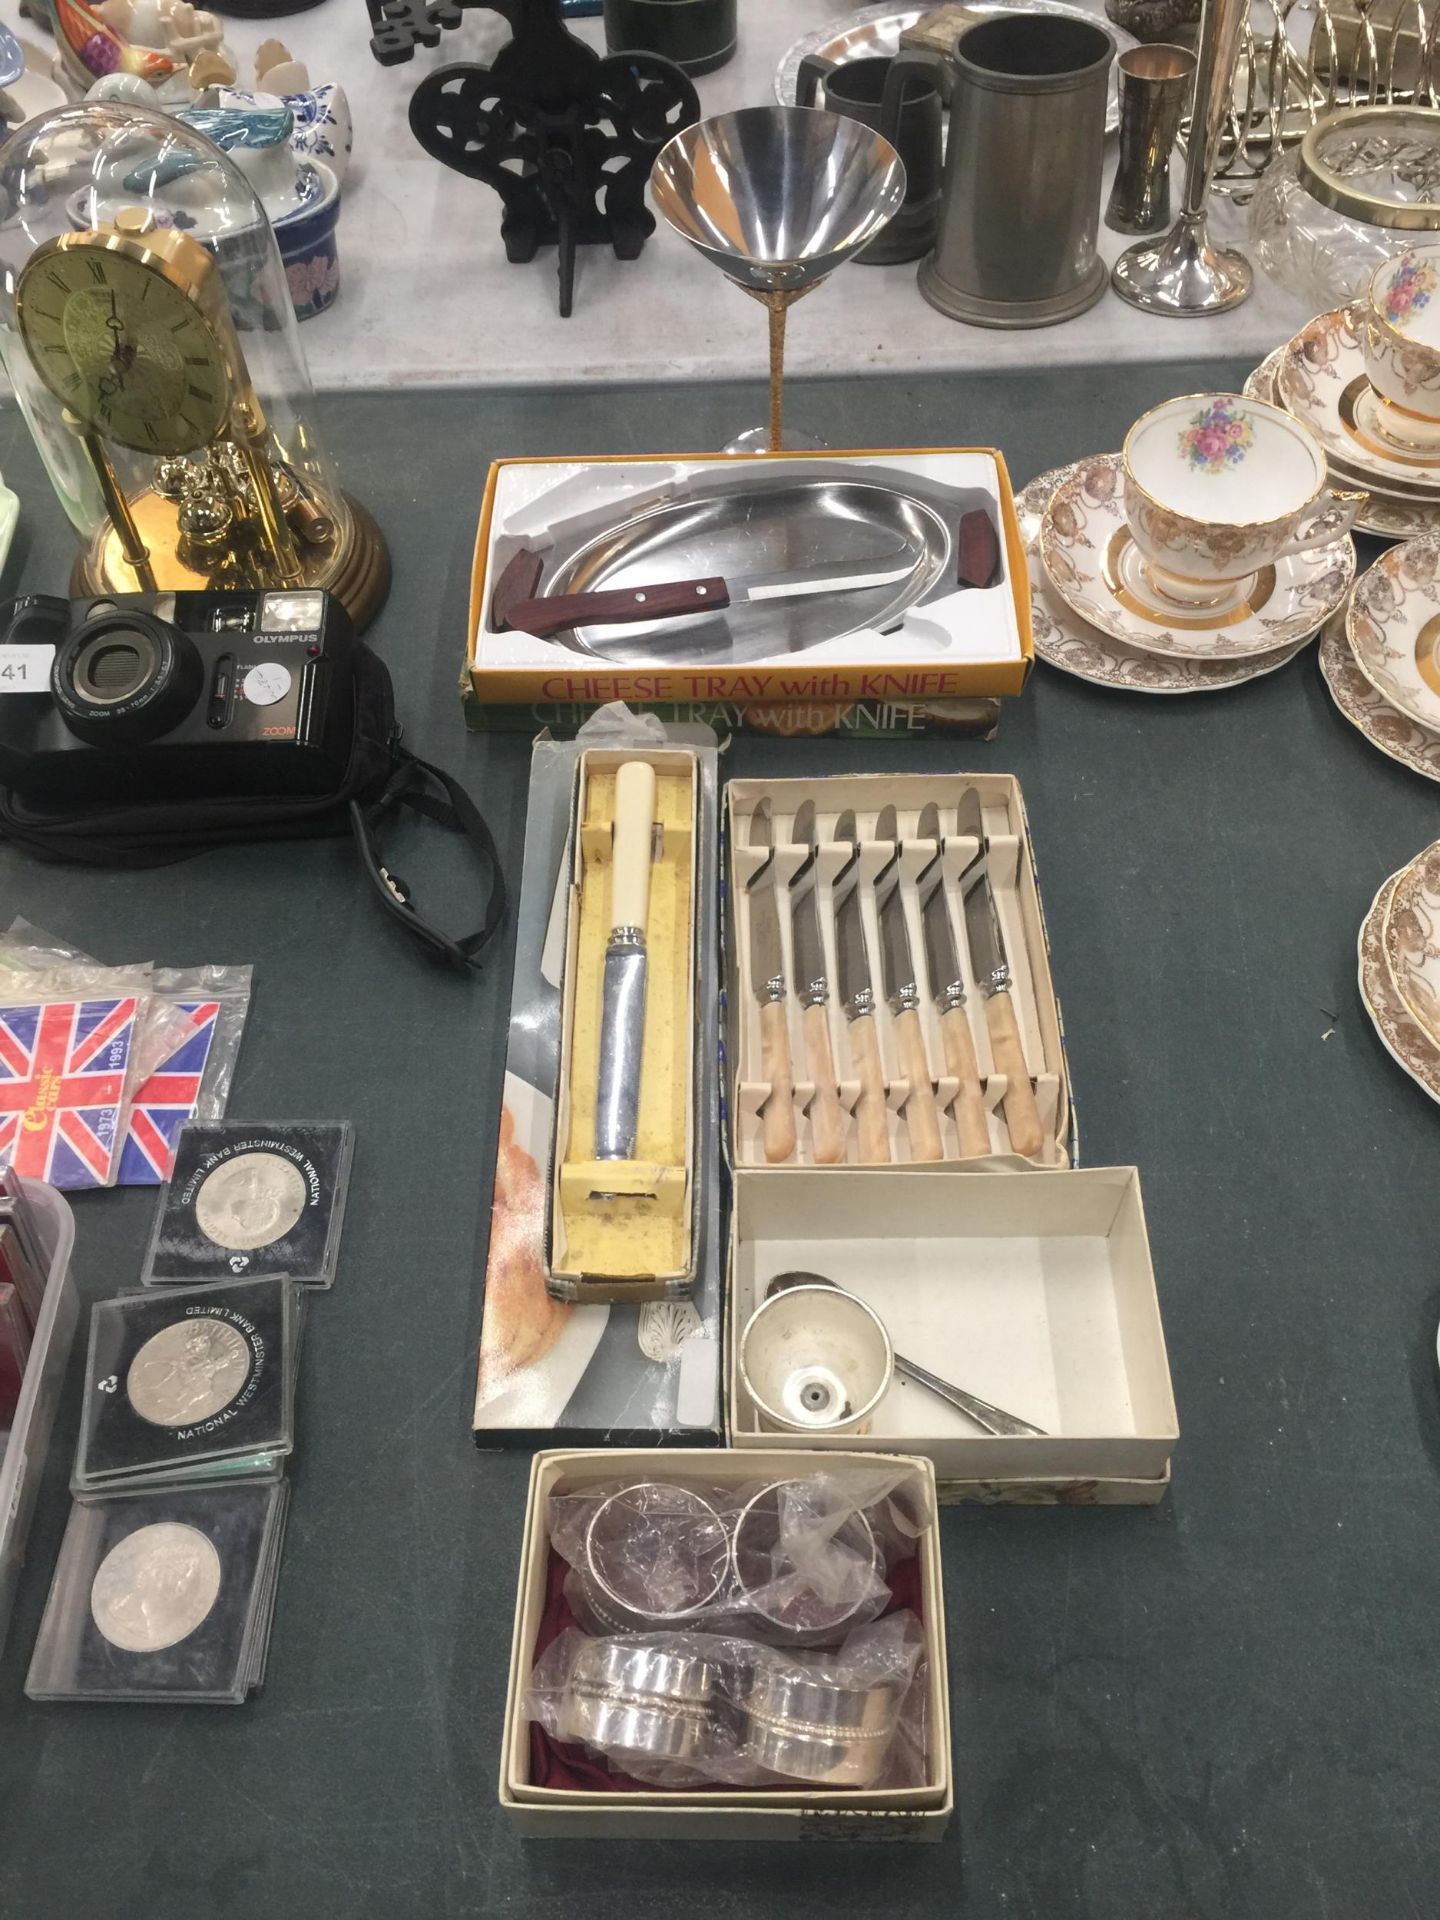 A QUANTITY OF FLATWARE TO INCLUDE BOXED KNIVES, A CHEESE TRAY WITH KNIFE, NAPKIN RINGS, MARTINI